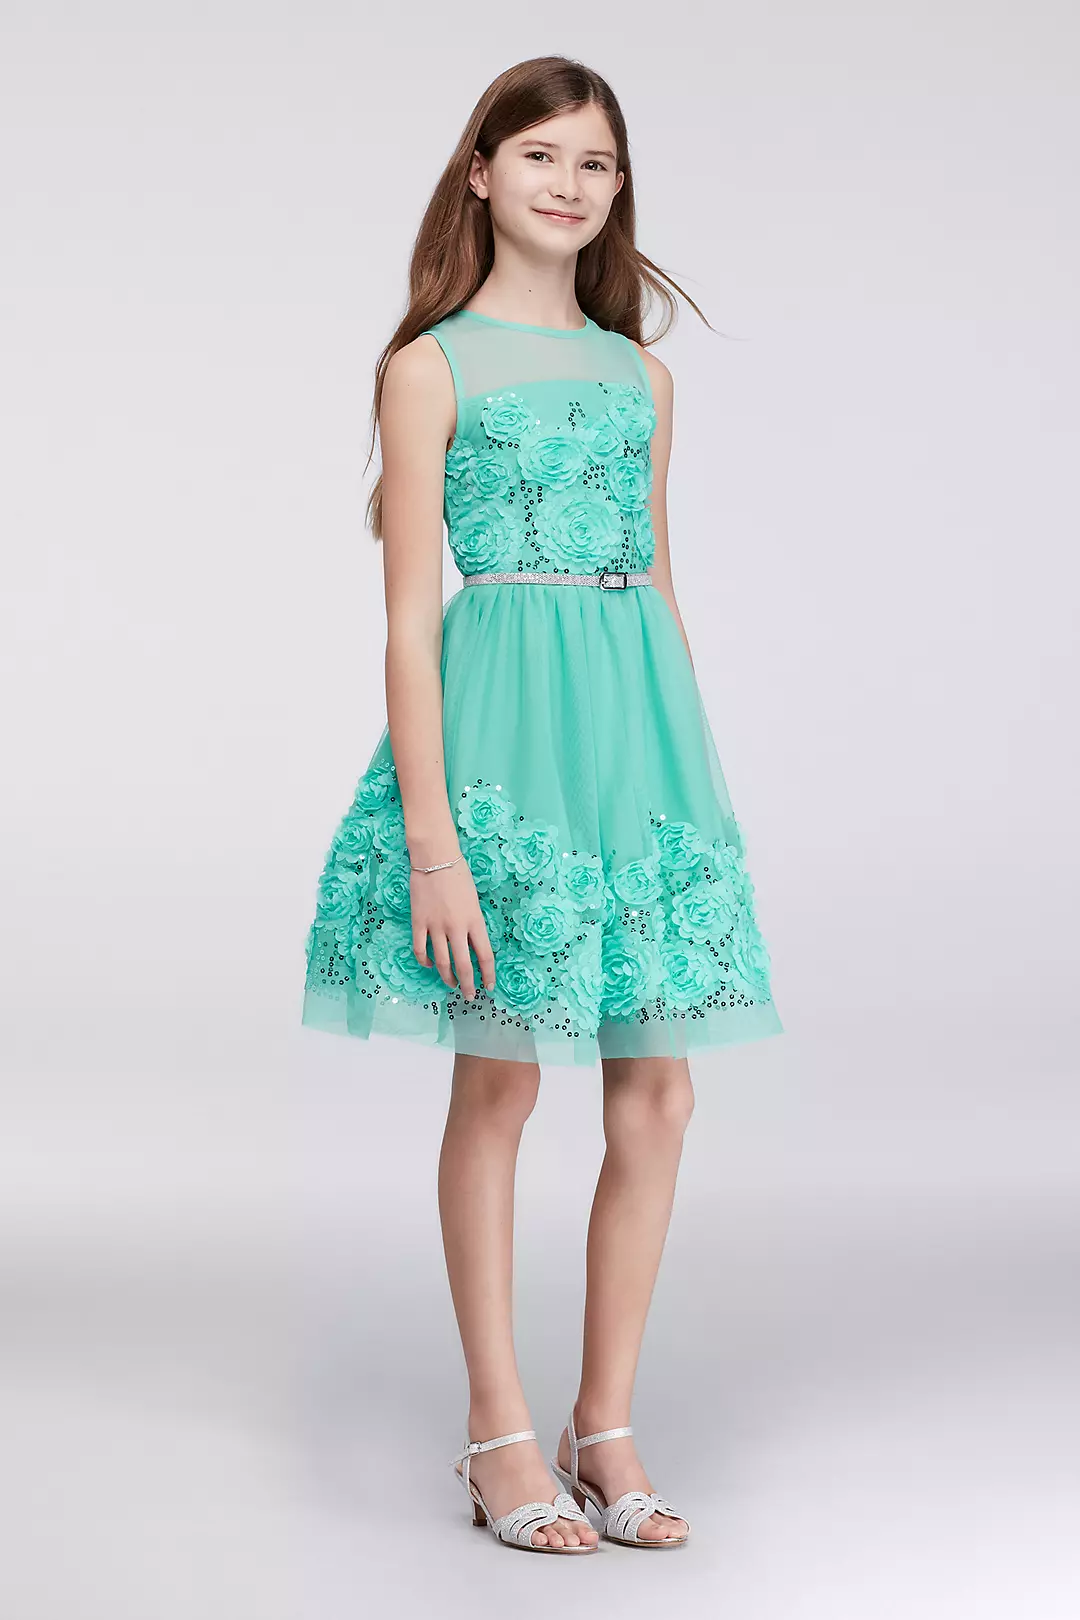 Chiffon Party Dress with 3-D Ribbon Flowers Image